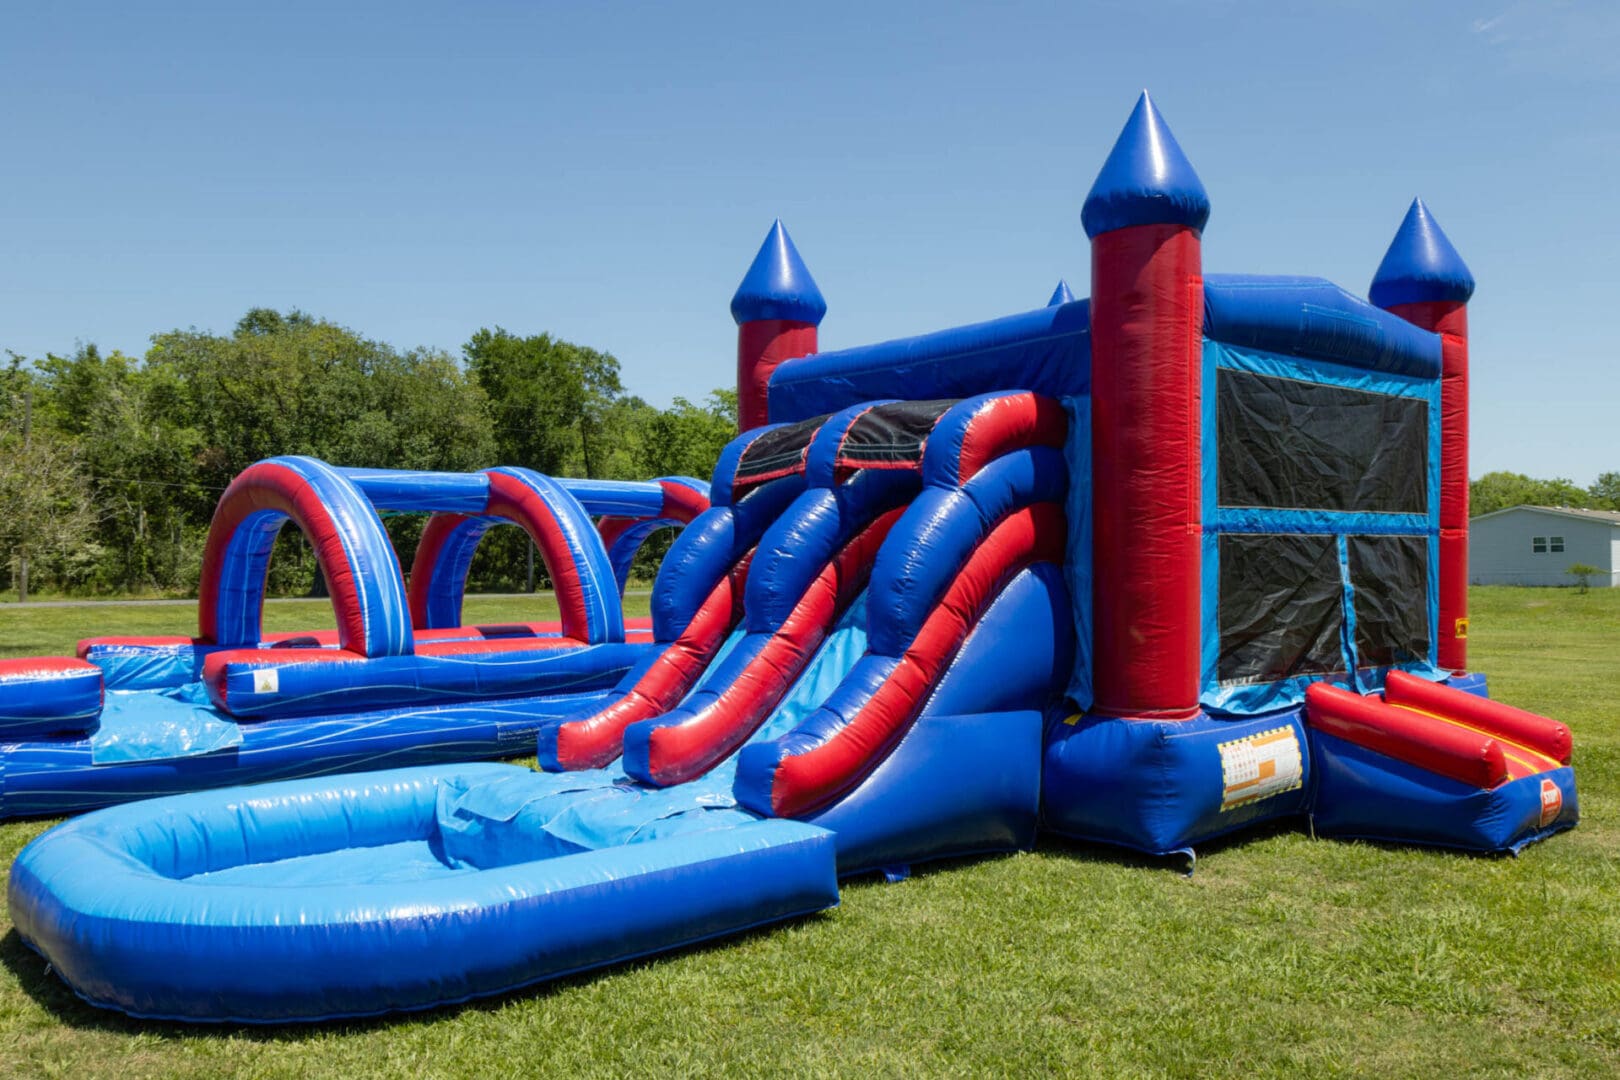 A blue and red inflatable slide with water.